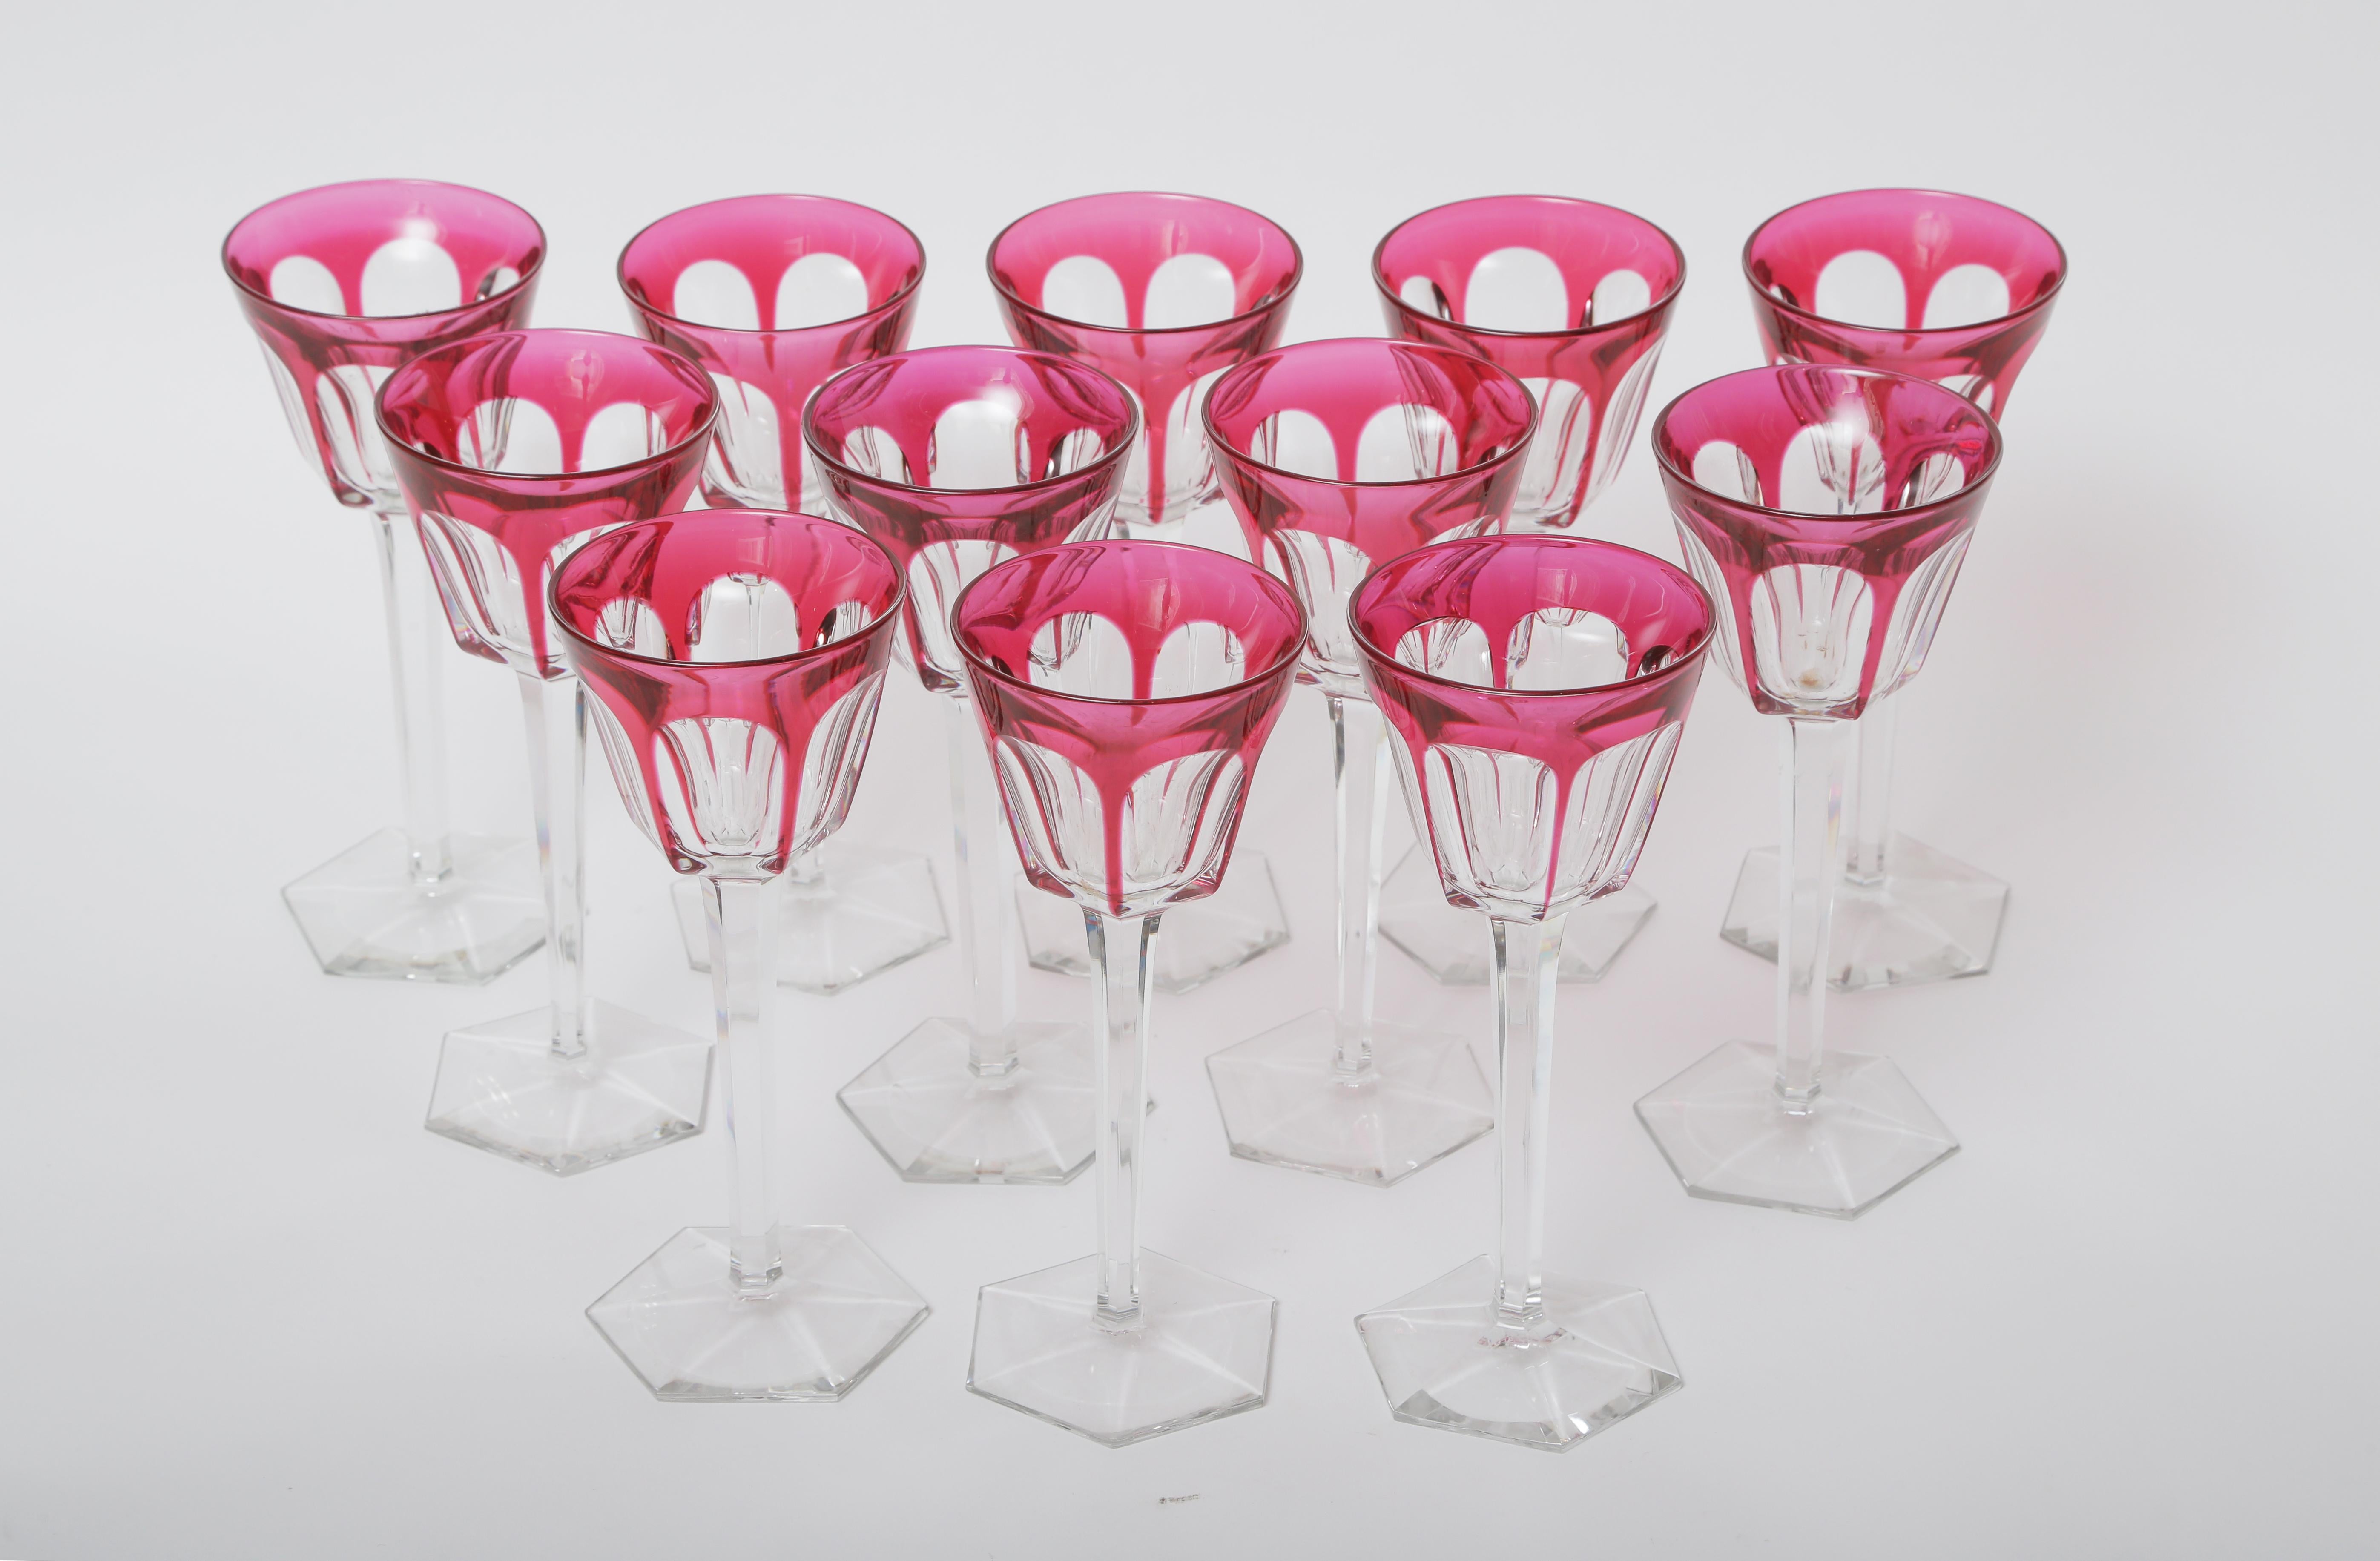 From the re known cristallerie Baccarat, a rich ruby red cased to clear set of 12 wine goblets. These are nice and tall and feature a fully cut stem with a nicely shaped base. In very nice vintage condition and some retain their original hall marks